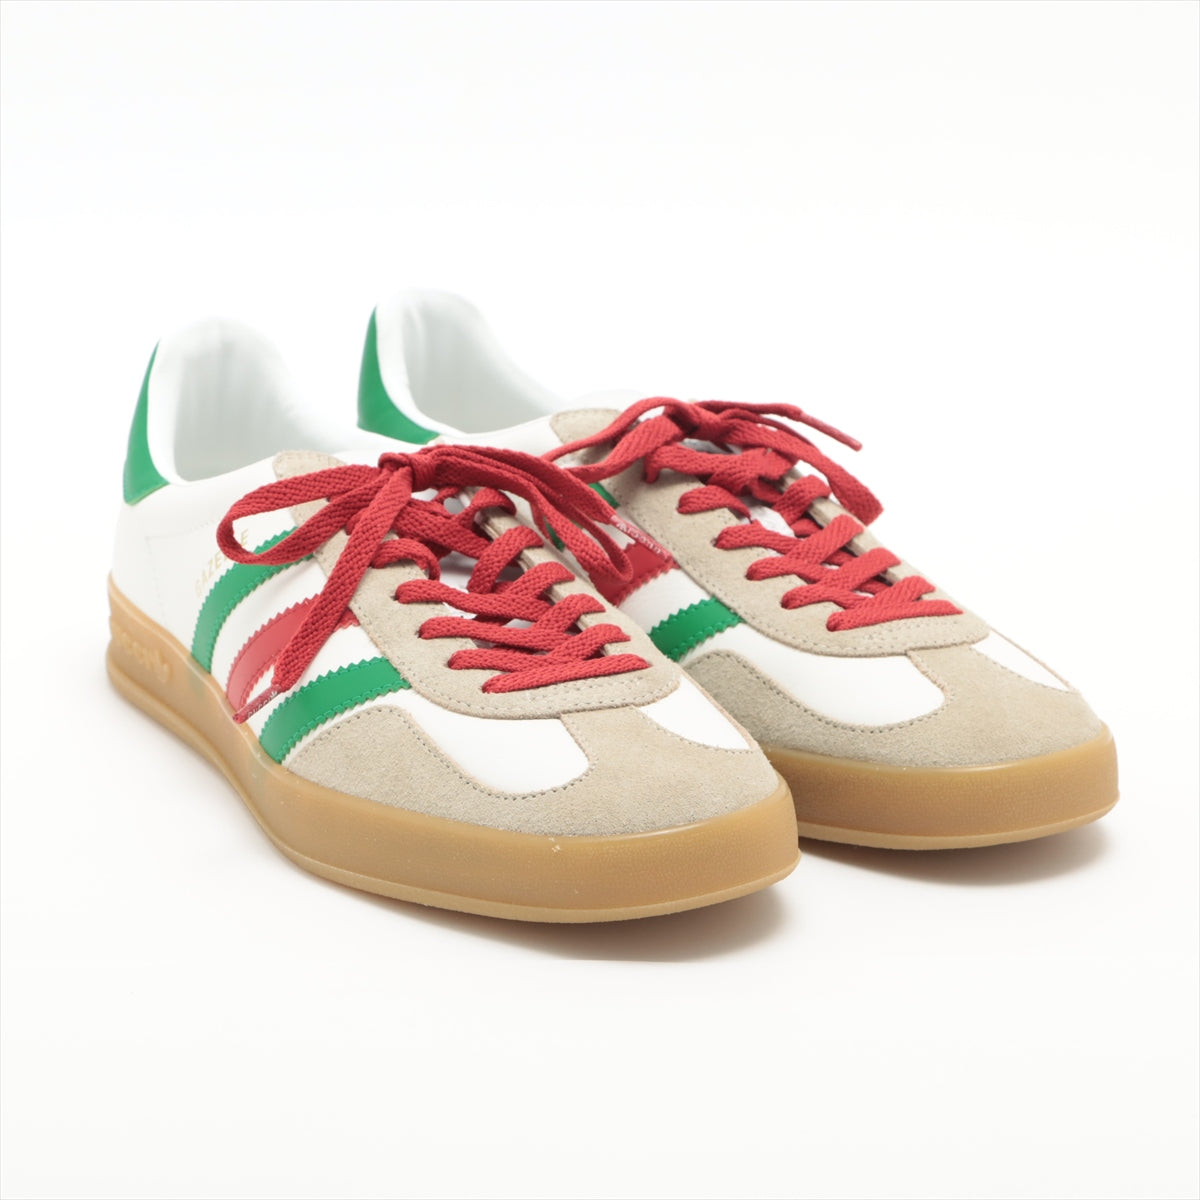 Gucci x adidas Gazelle Leather & Suede Sneakers 29cm Men's White 646652 Is there a replacement string